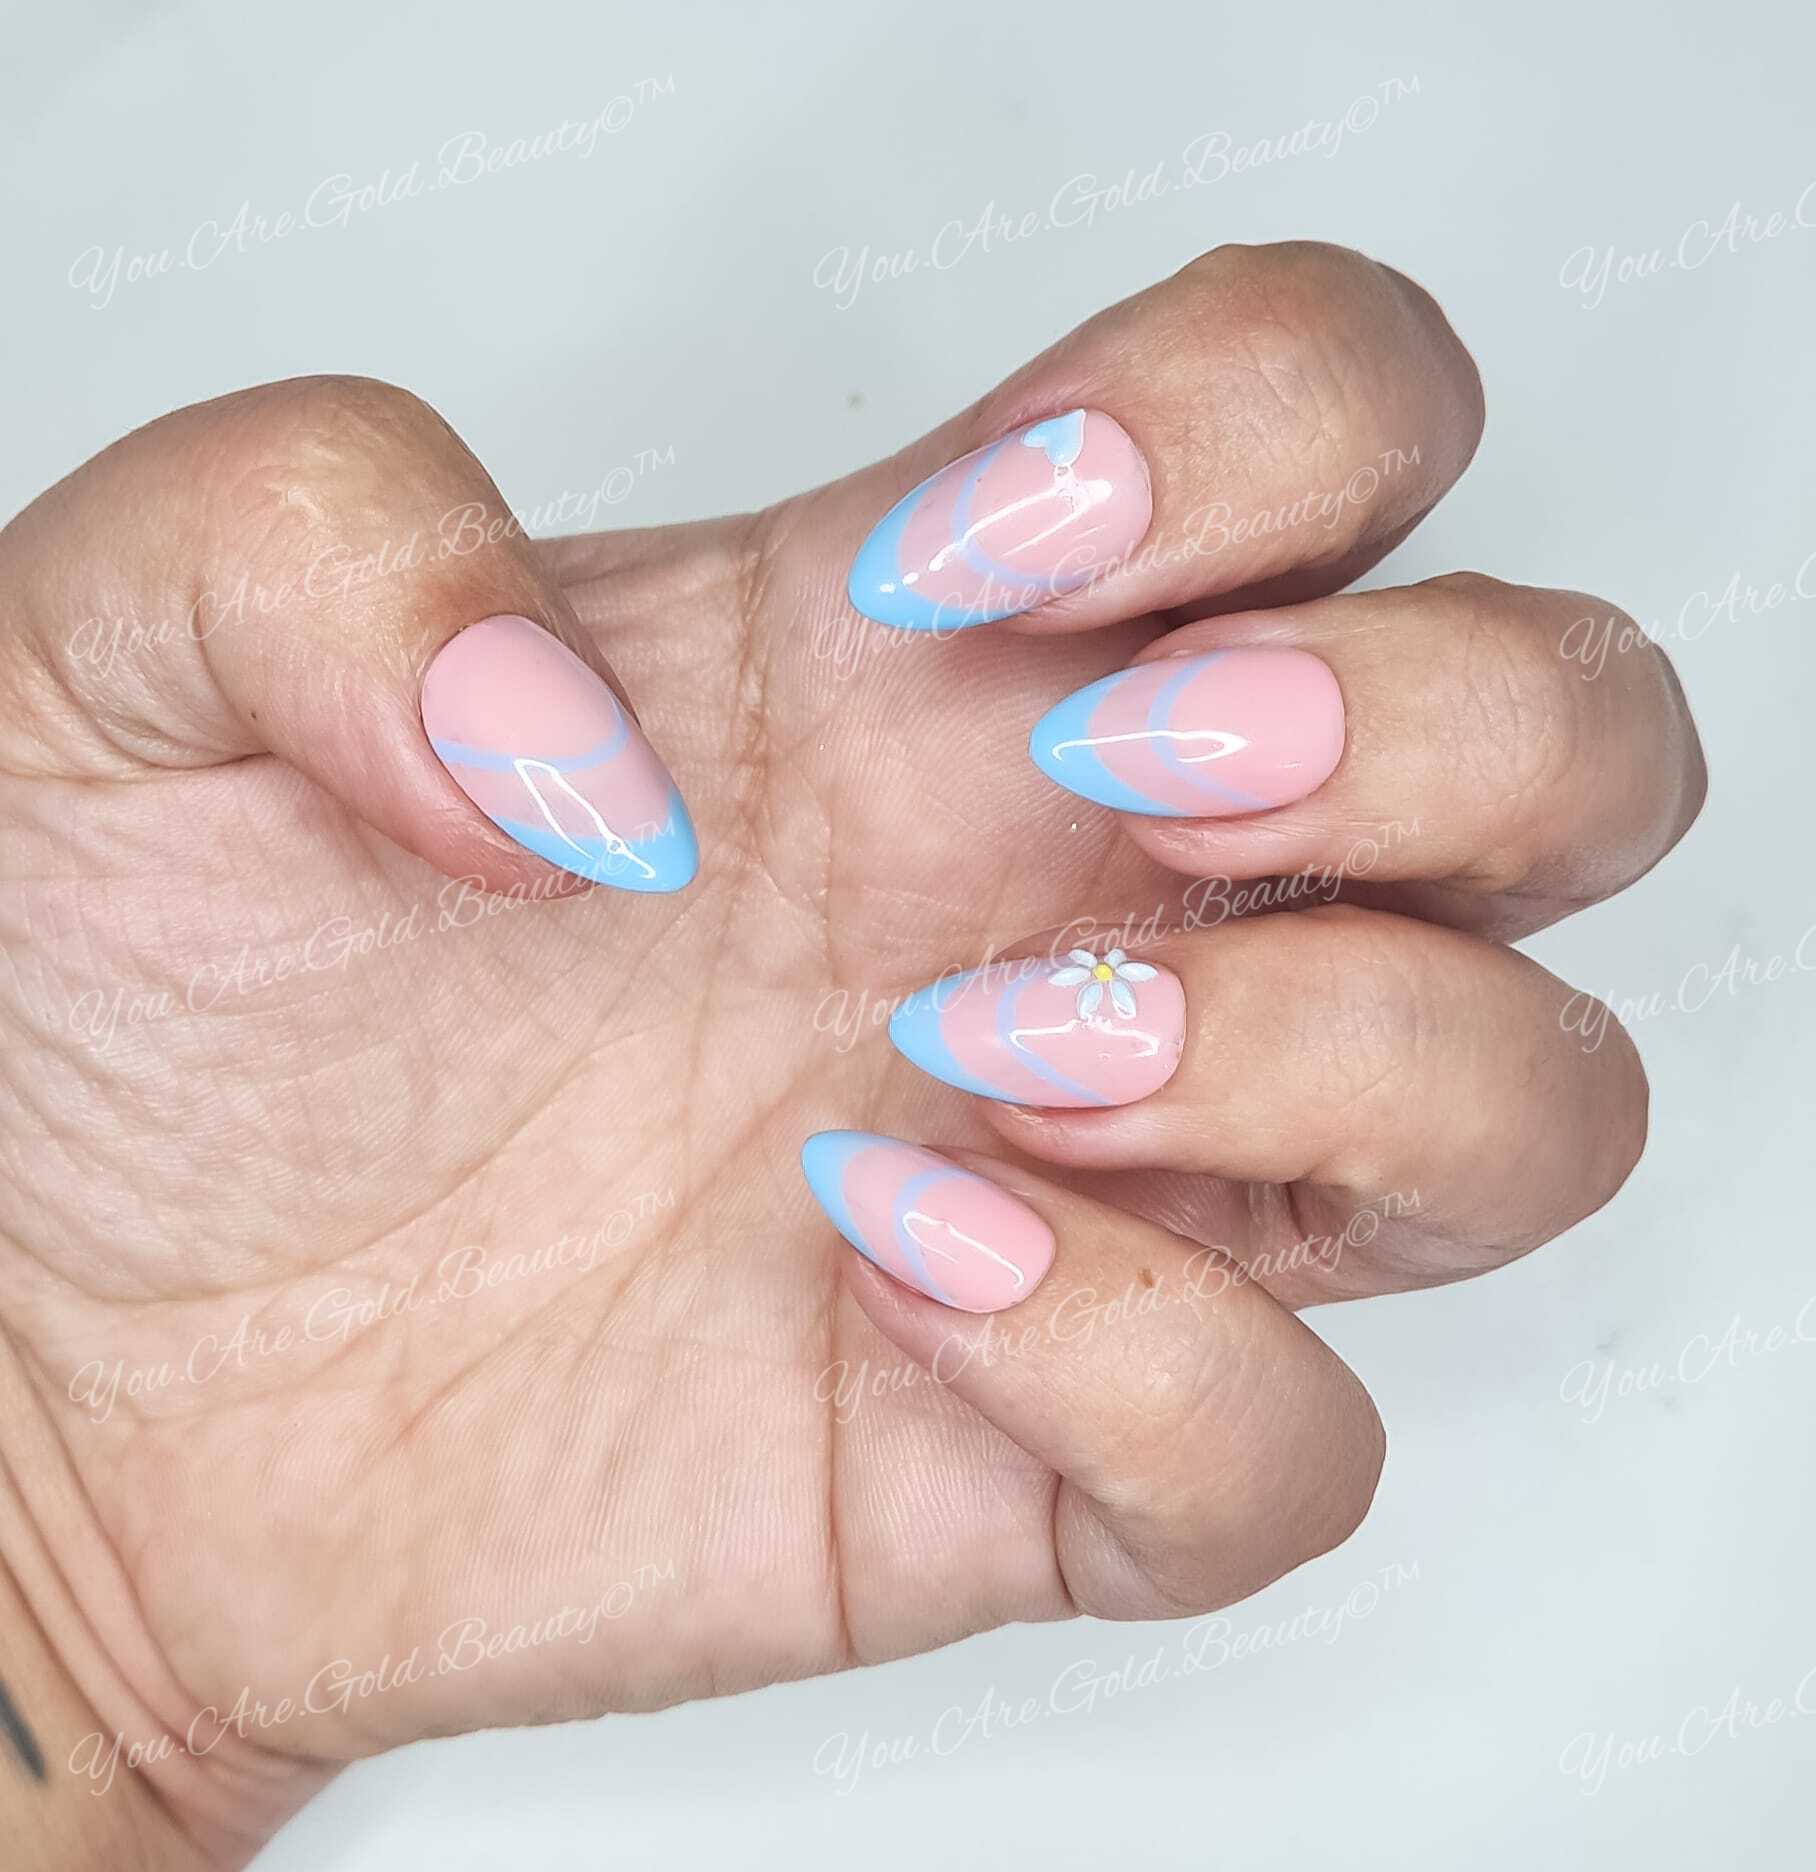 Luxury Press On nails UK, false nails almond nails shape with blue french tip design and flower Mila, press on nails uk, blue, french tip, almond shape nails,